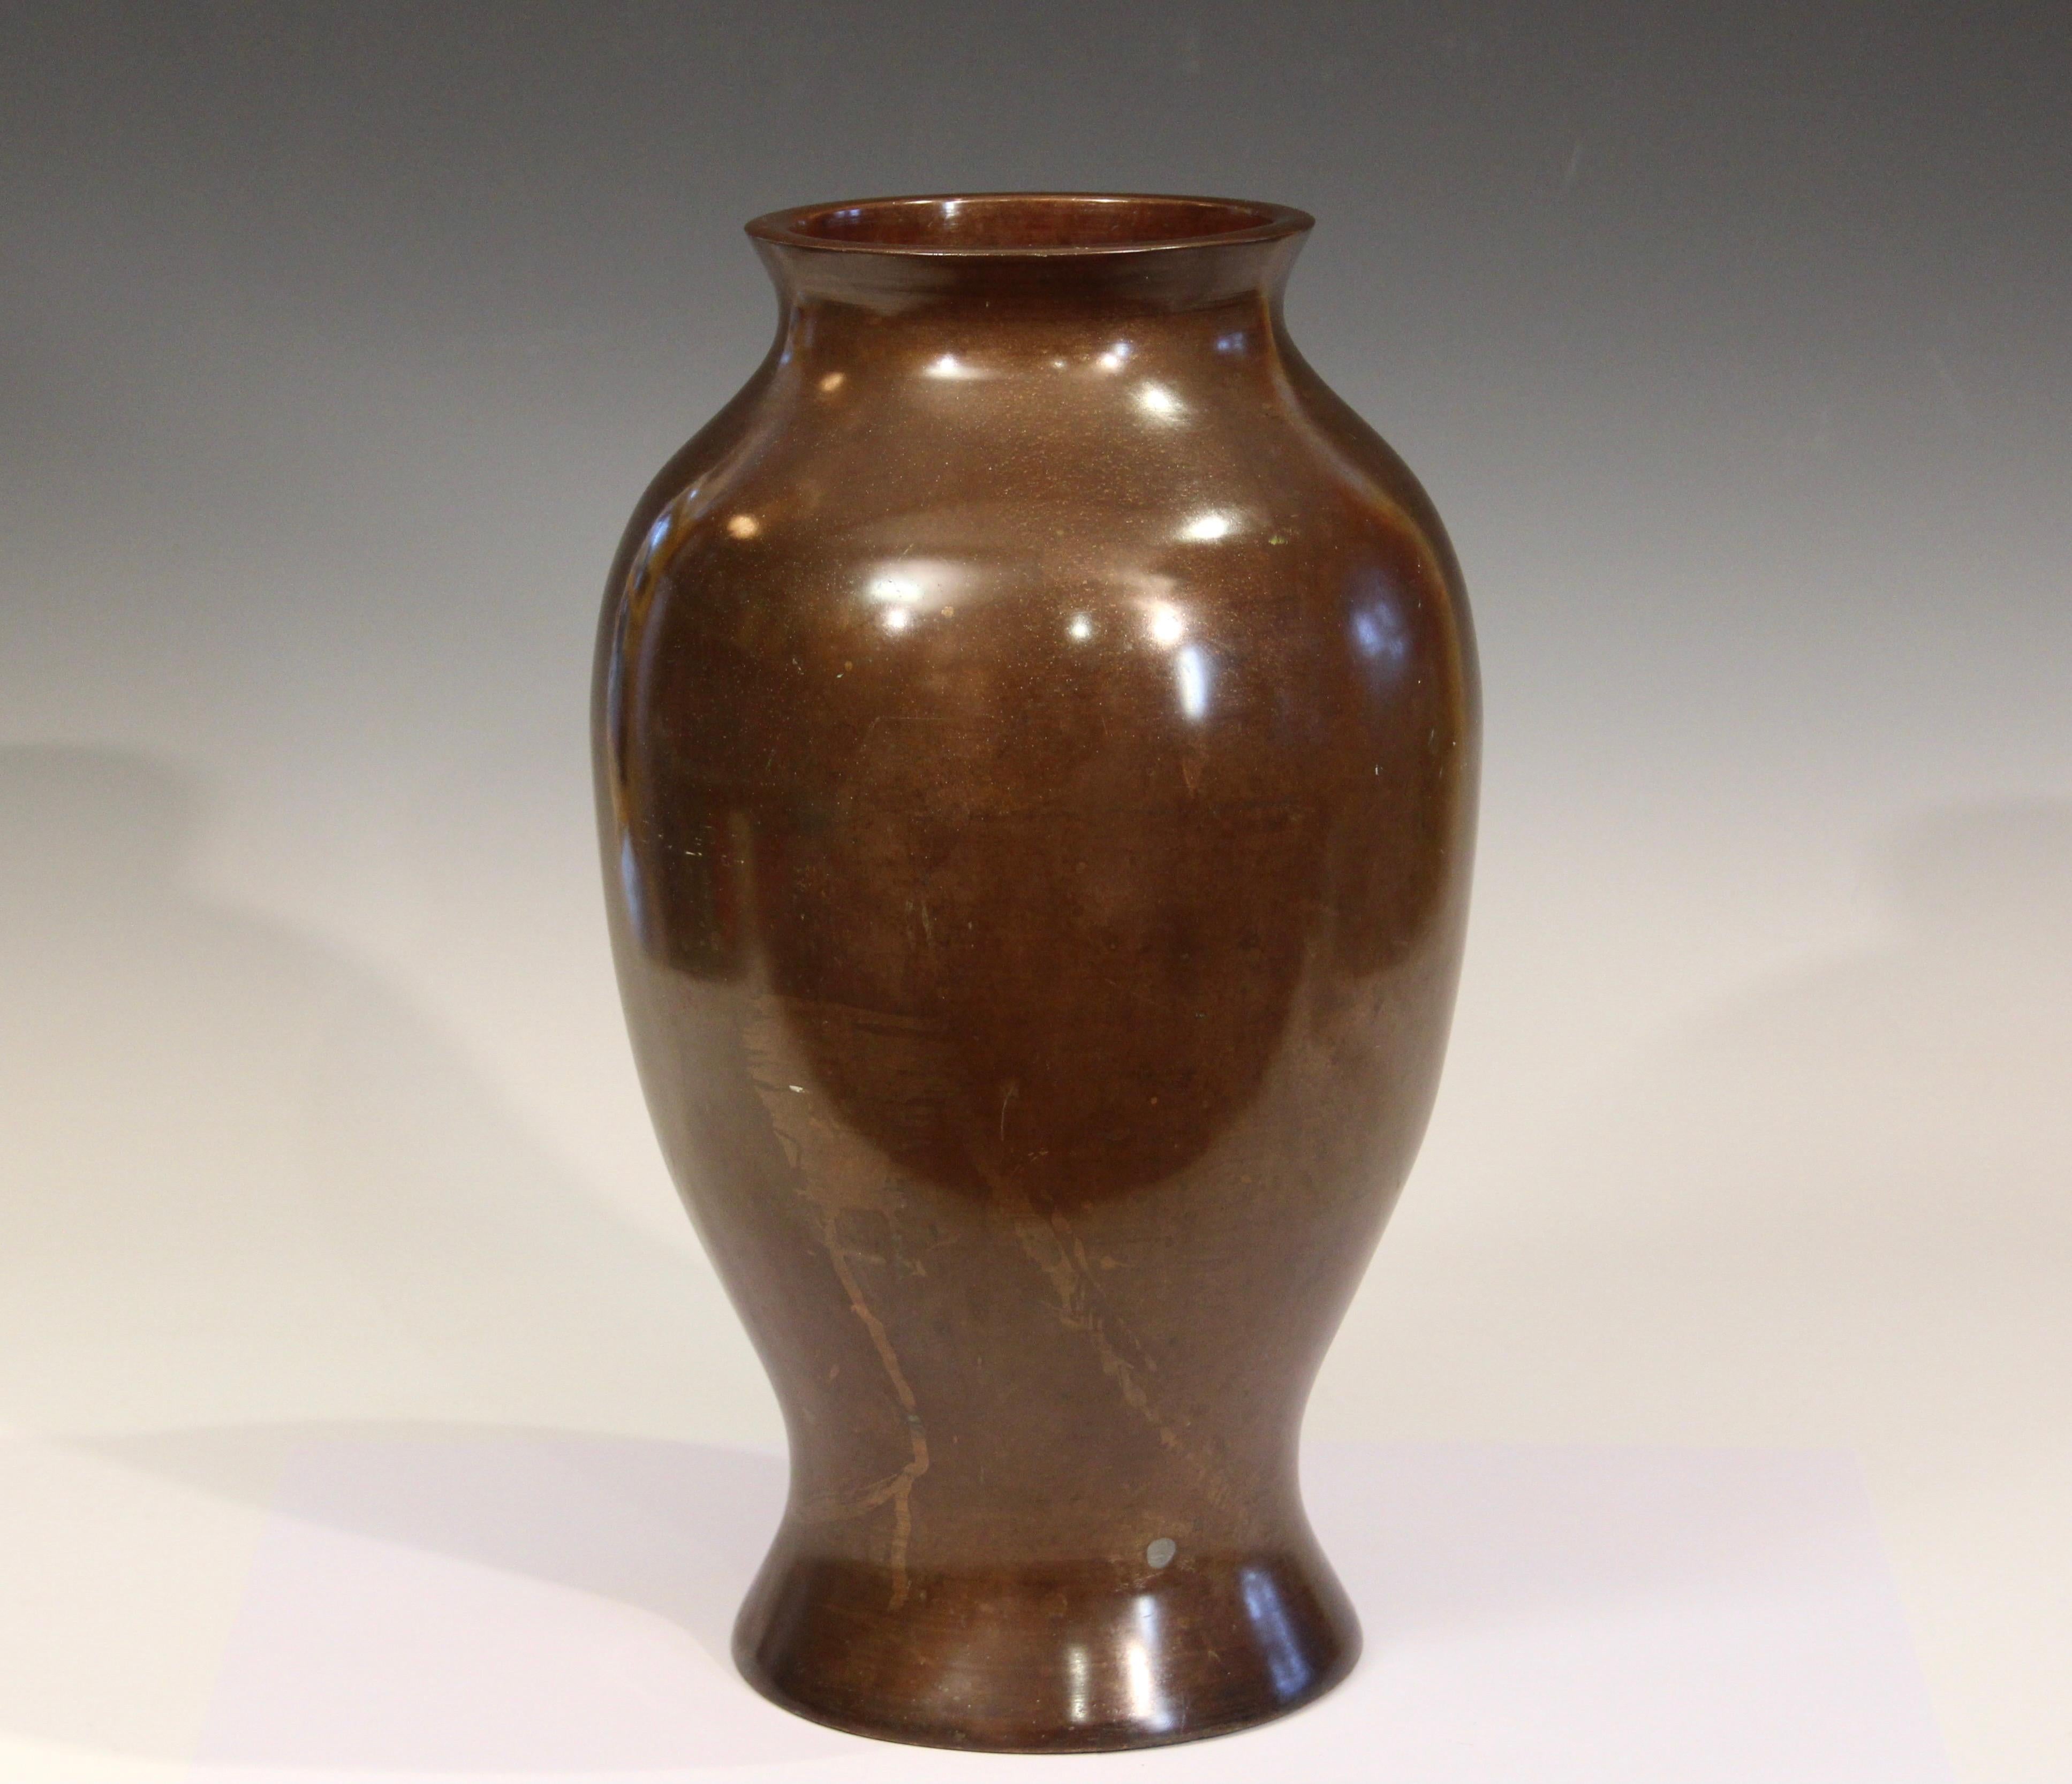 Large old Japanese bronze vase with rich patina. Circa early/mid 20th century. 10 pounds. 14